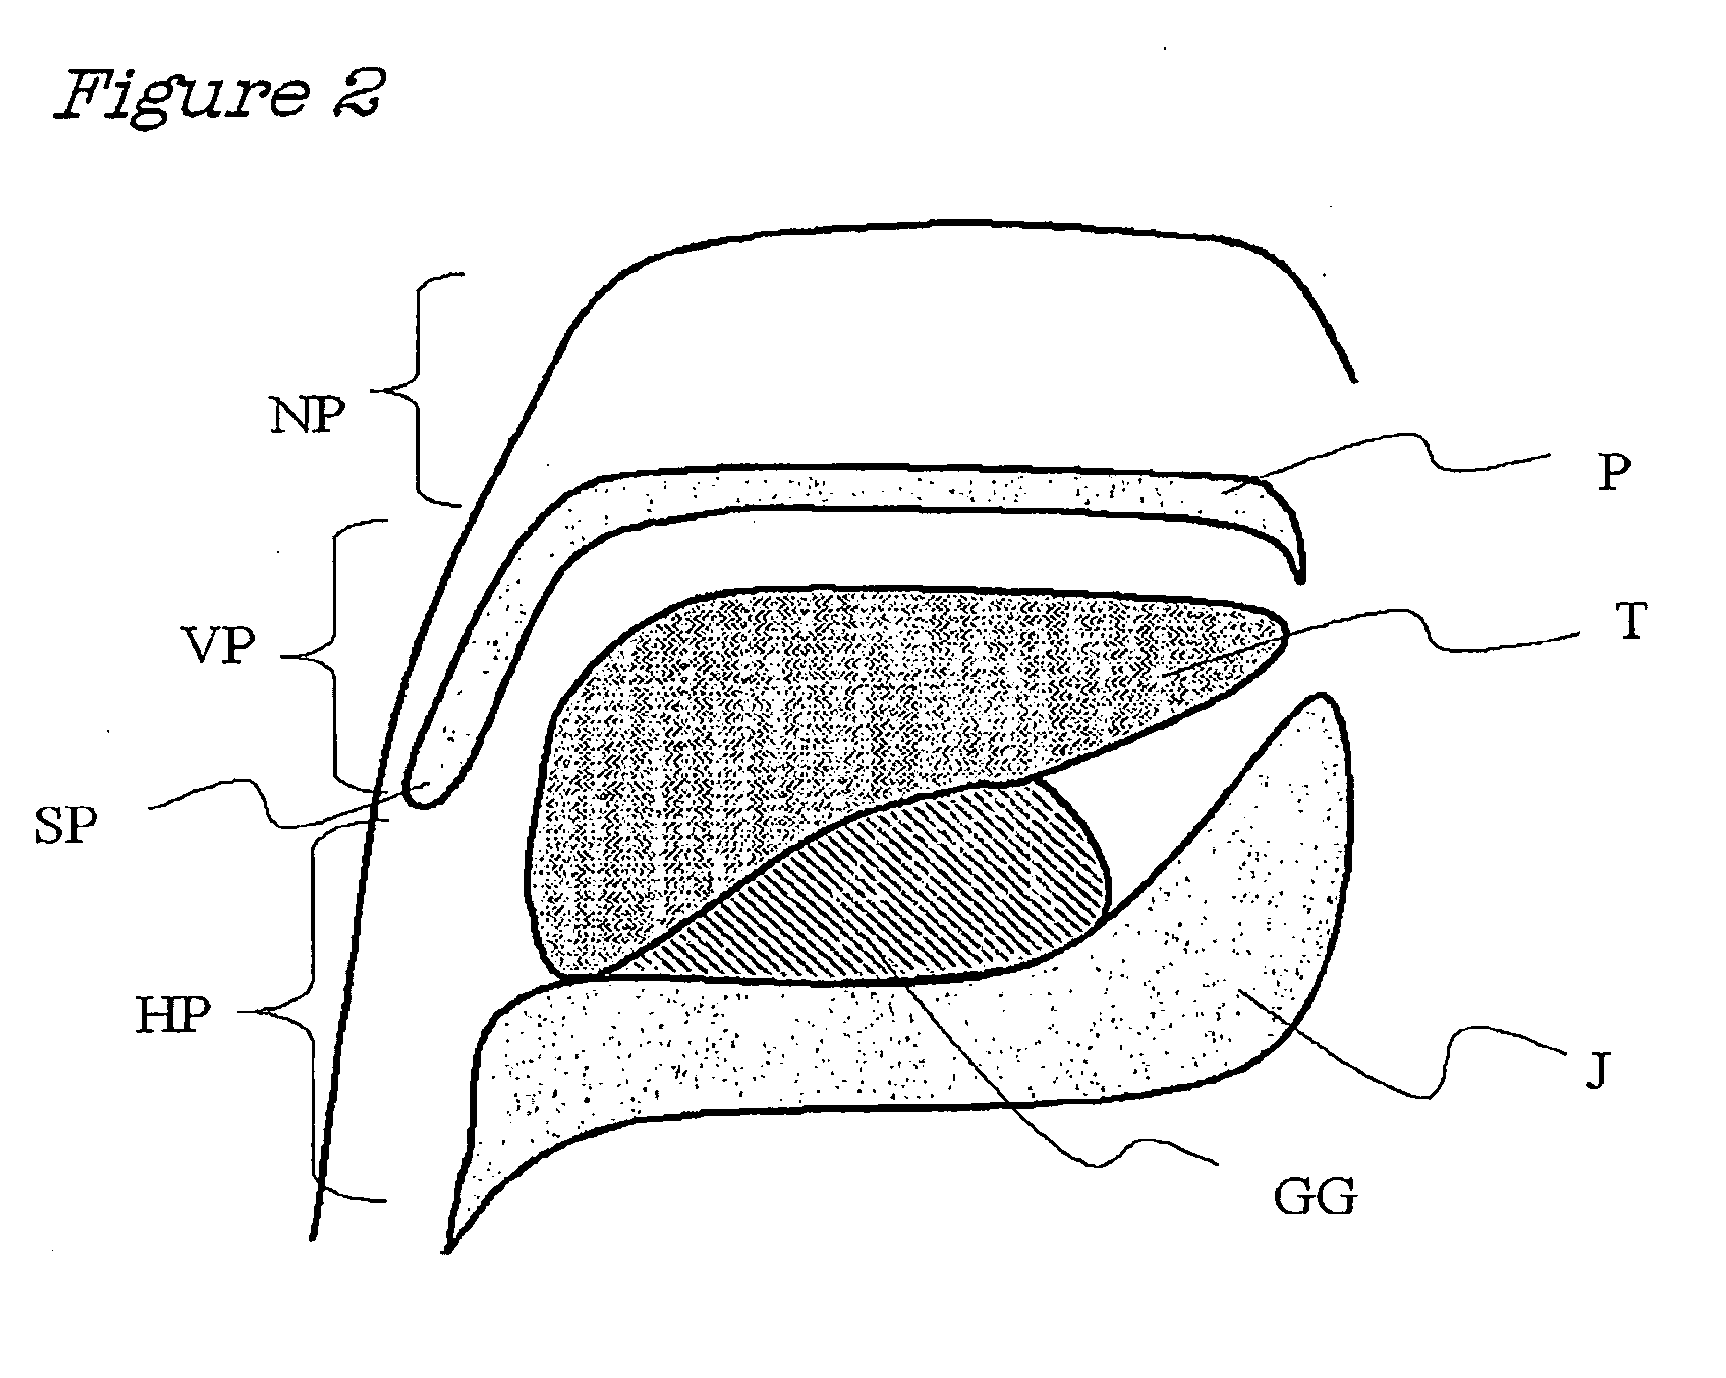 Method and Device for the Treatment of Obstructive Sleep Apnea and Snoring